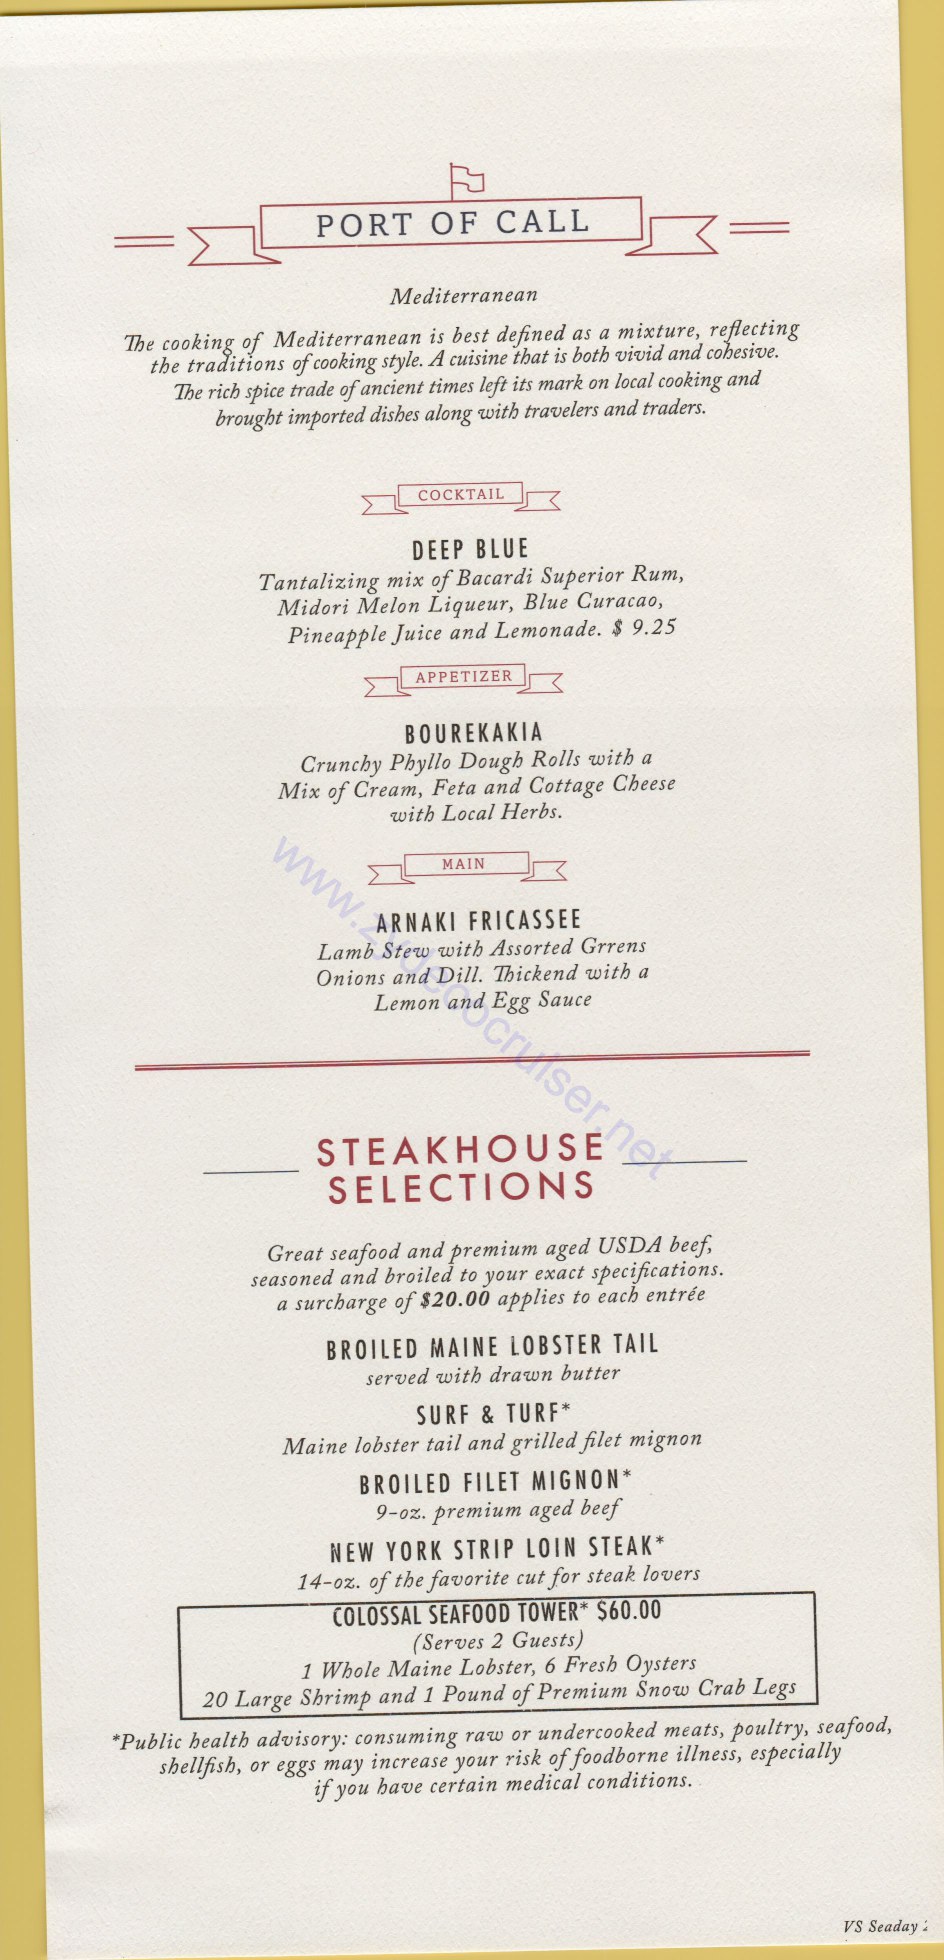 Carnival Horizon Day 8 MDR Dinner Sea Day 3 Port of Call Menu